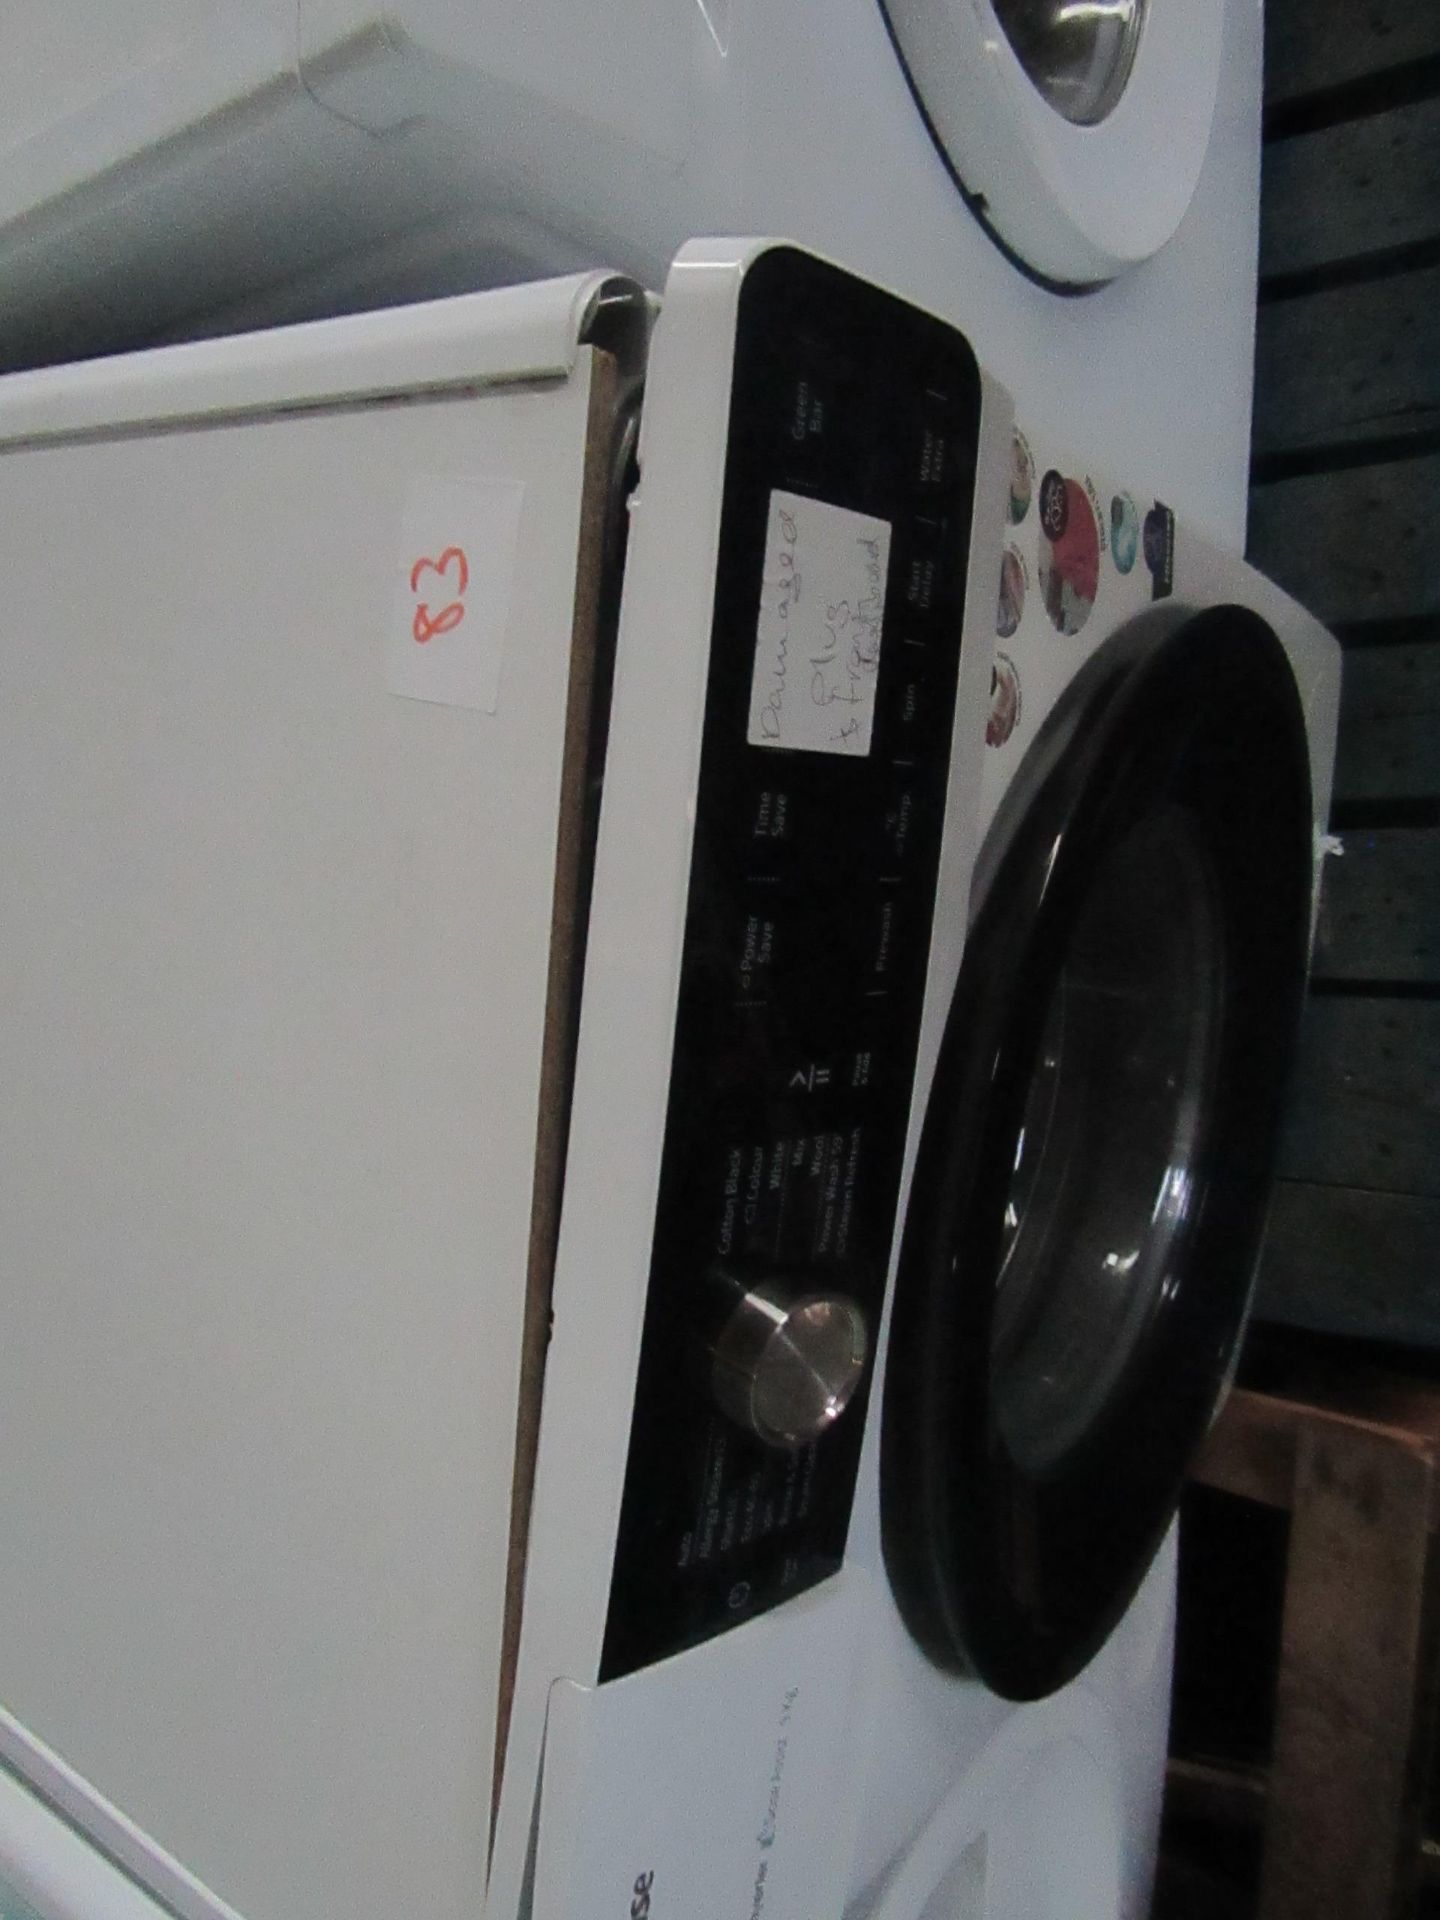 Hisense Dose Assist washing machine, spares and repairs, the front panel is coming off. - Image 2 of 2